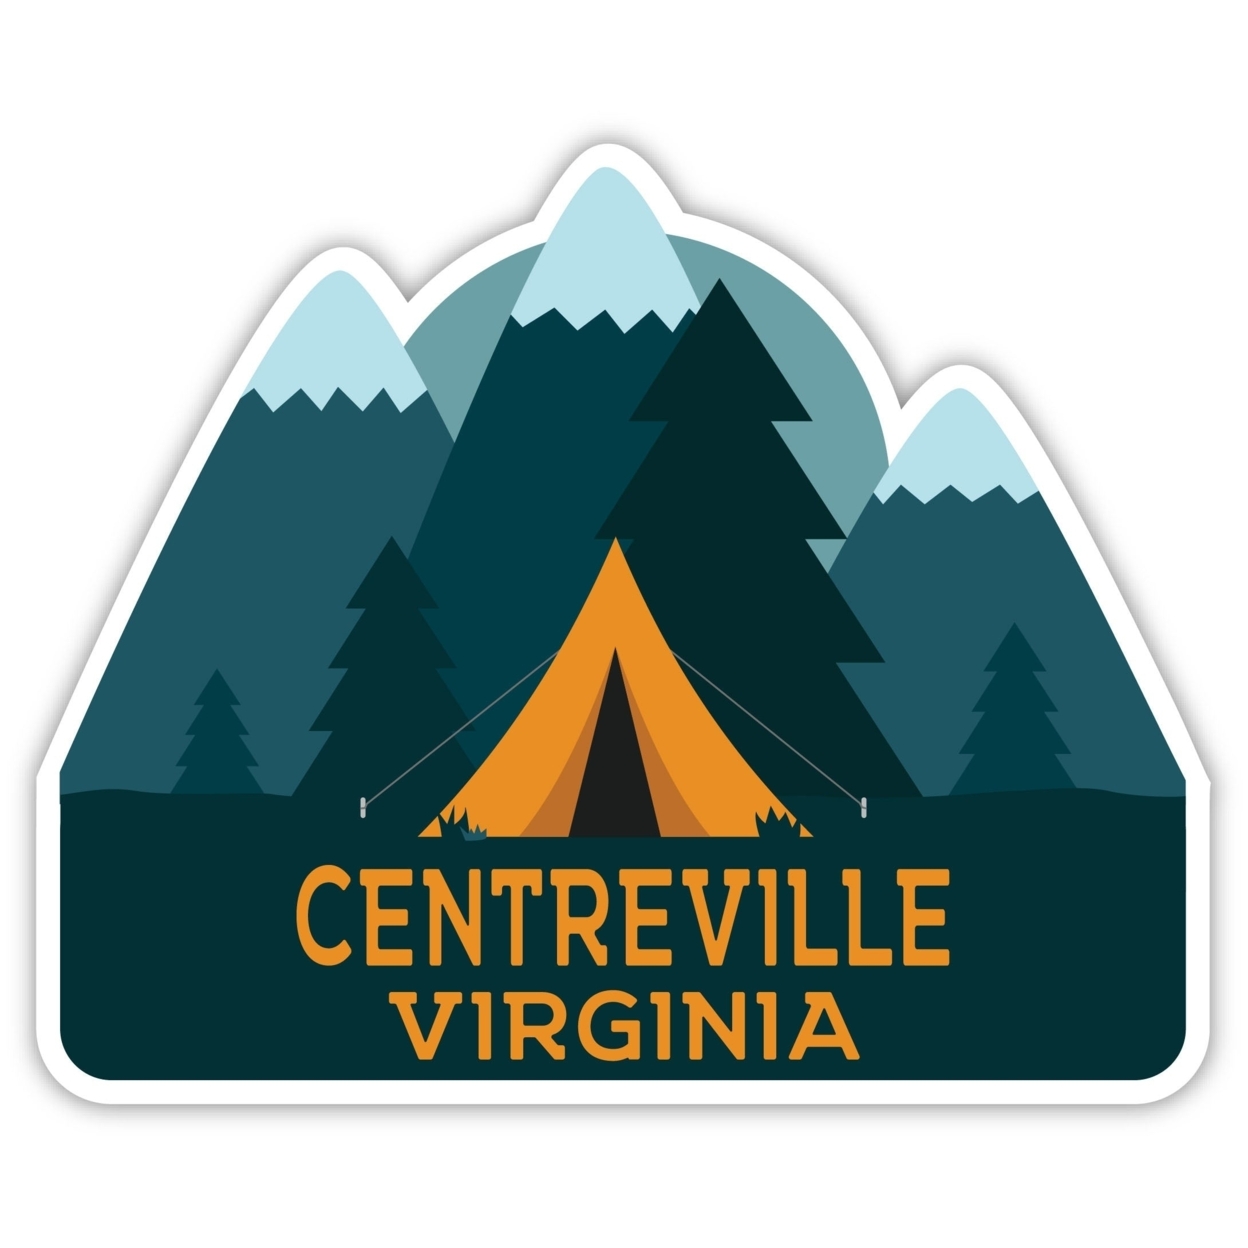 Centreville Virginia Souvenir Decorative Stickers (Choose Theme And Size) - 4-Pack, 8-Inch, Tent